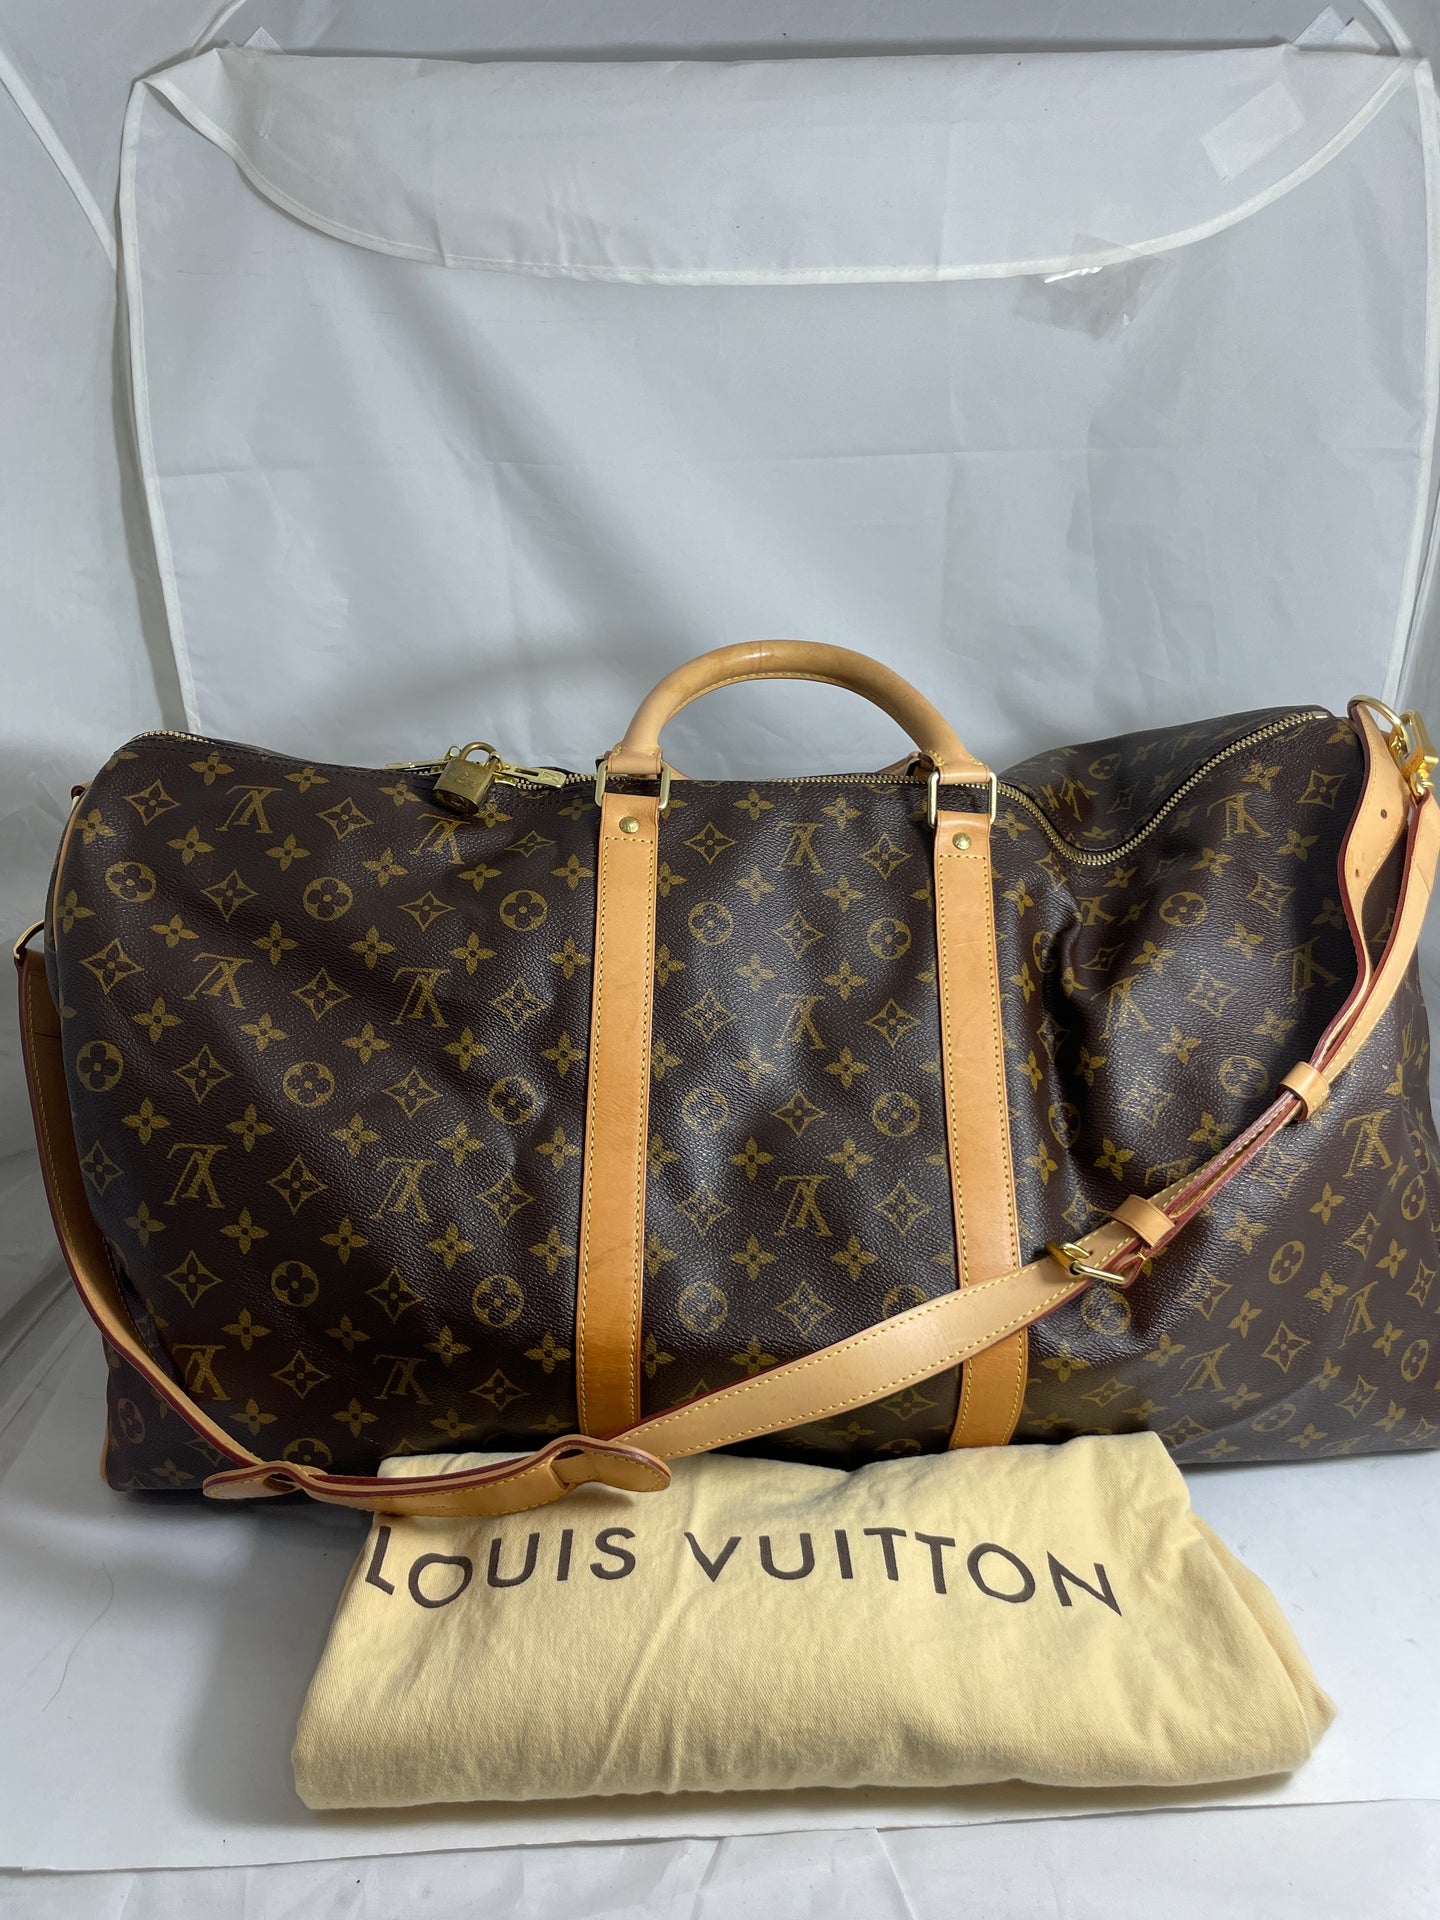 Louis Vuitton Monogram Coated Canvas Keepall Luggage